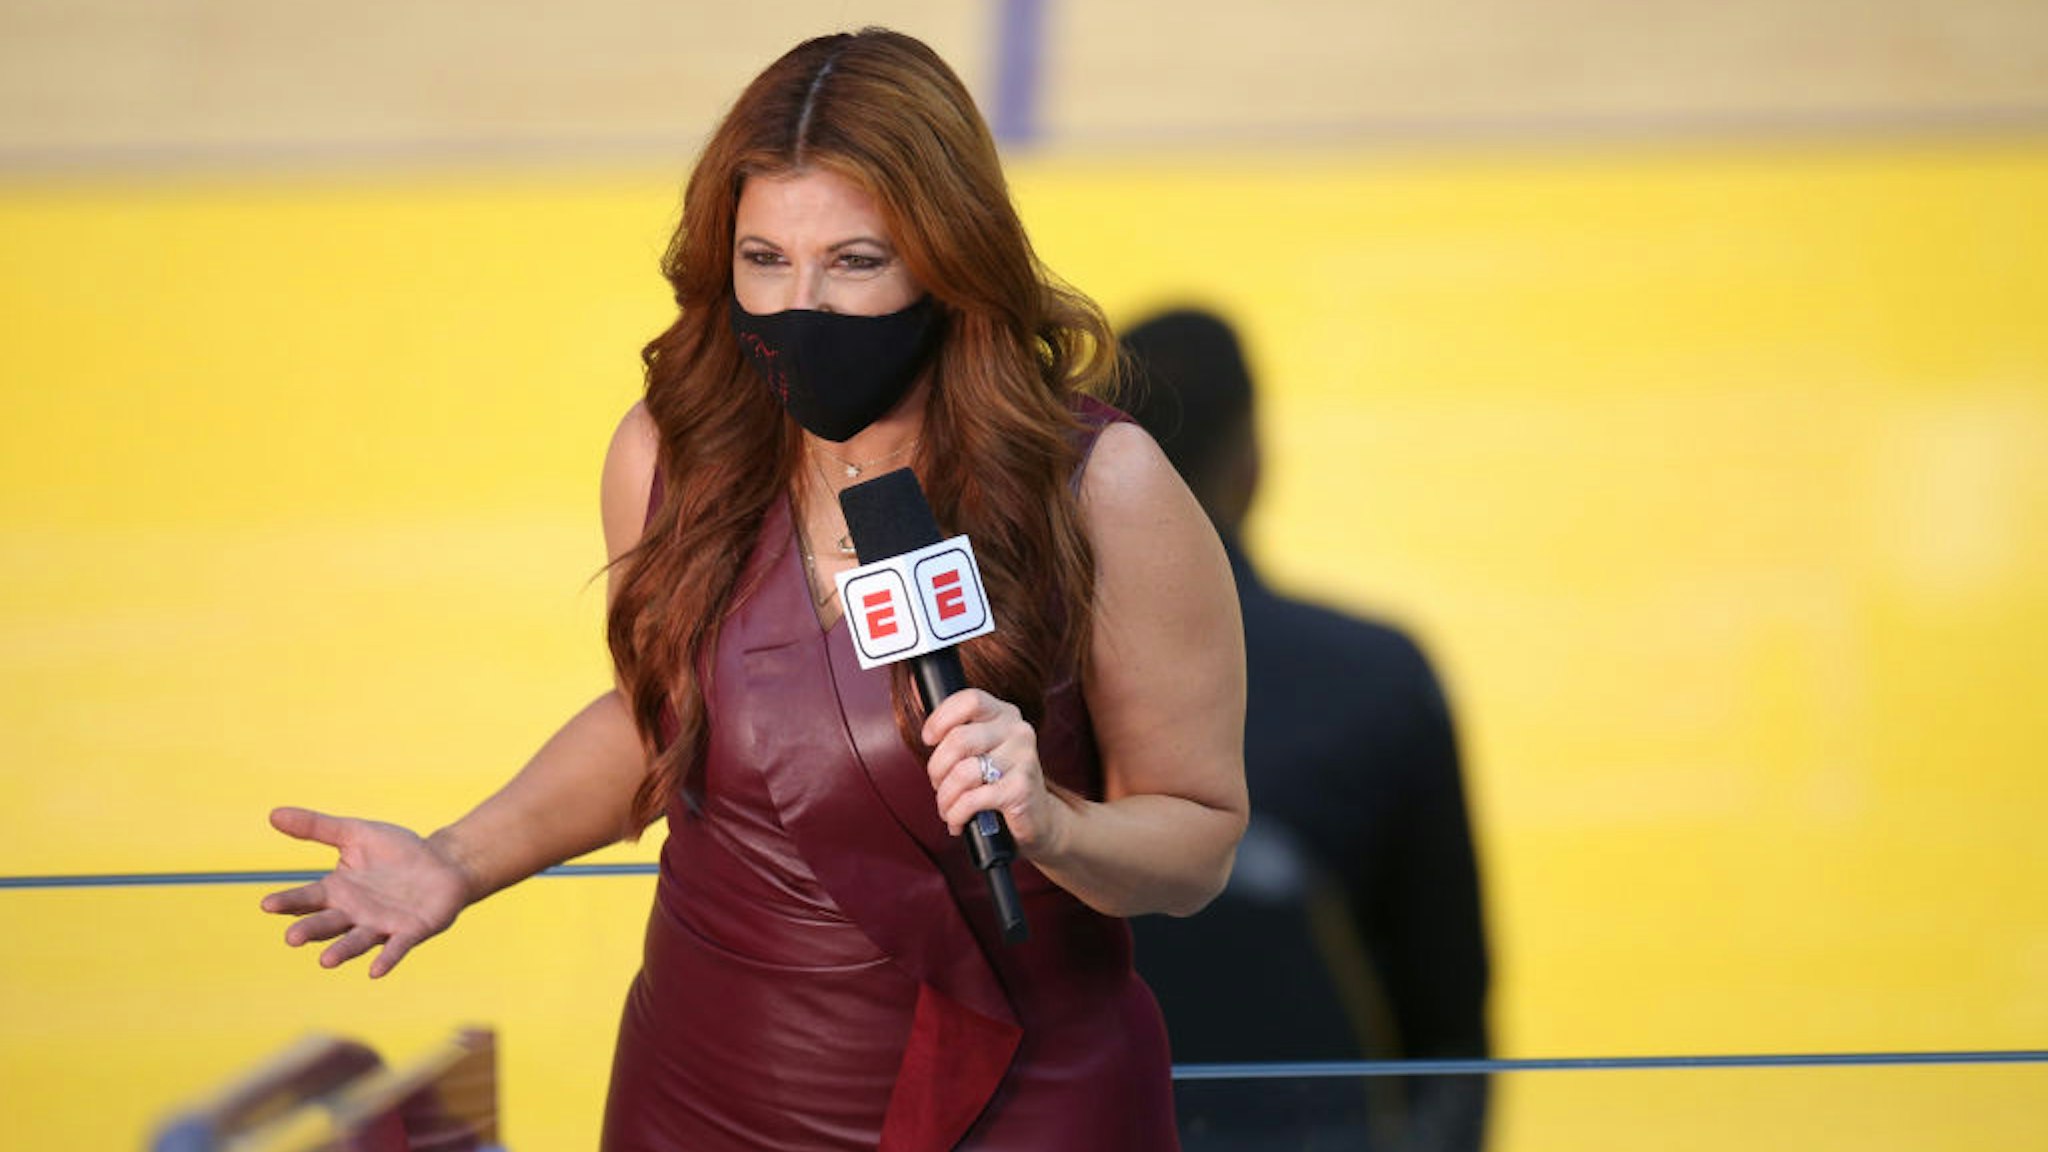 Basketball: ESPN sideline reporter Rachel Nichols during Golden State Warriors vs Brooklyn Nets game at Chase Center. Nichols weaing mask. Oakland, CA 2/13/2021 CREDIT: Brad Mangin (Photo by Brad Mangin/Sports Illustrated via Getty Images) (Set Number: X163528)